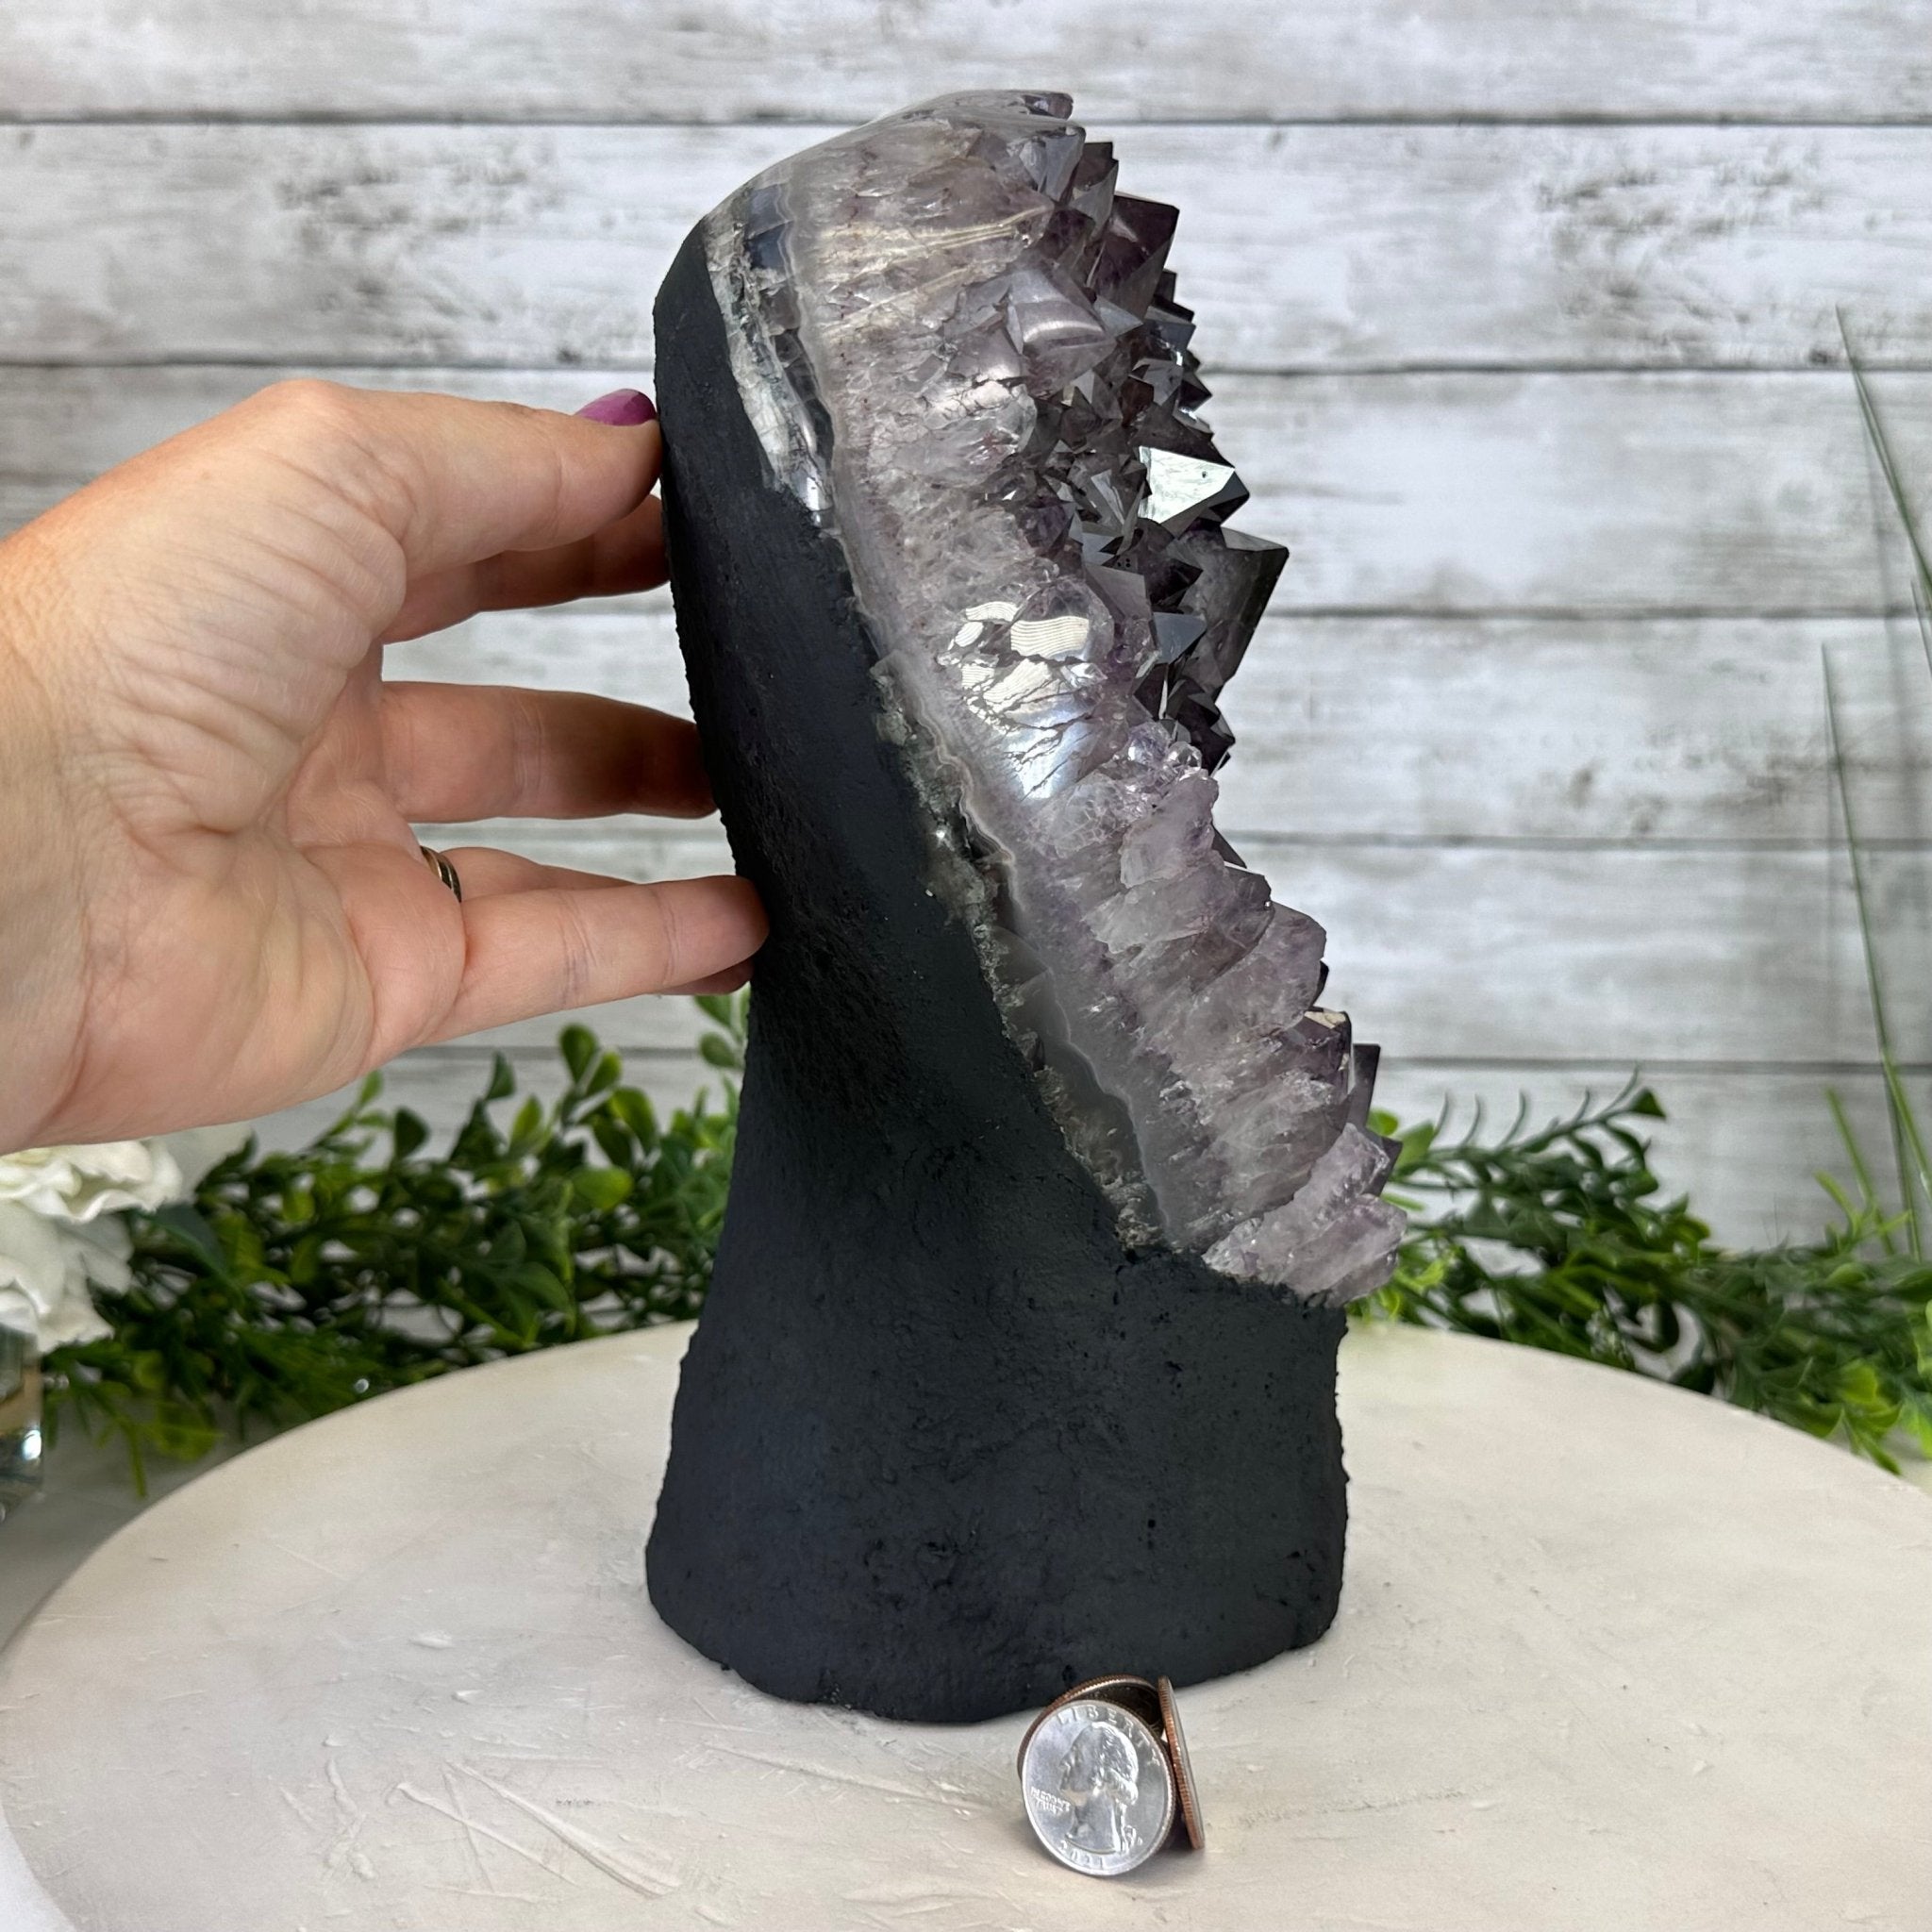 Extra Quality Amethyst Cluster, Cement Base, 10.4" Tall #5614-0112 - Brazil GemsBrazil GemsExtra Quality Amethyst Cluster, Cement Base, 10.4" Tall #5614-0112Clusters on Cement Bases5614-0112